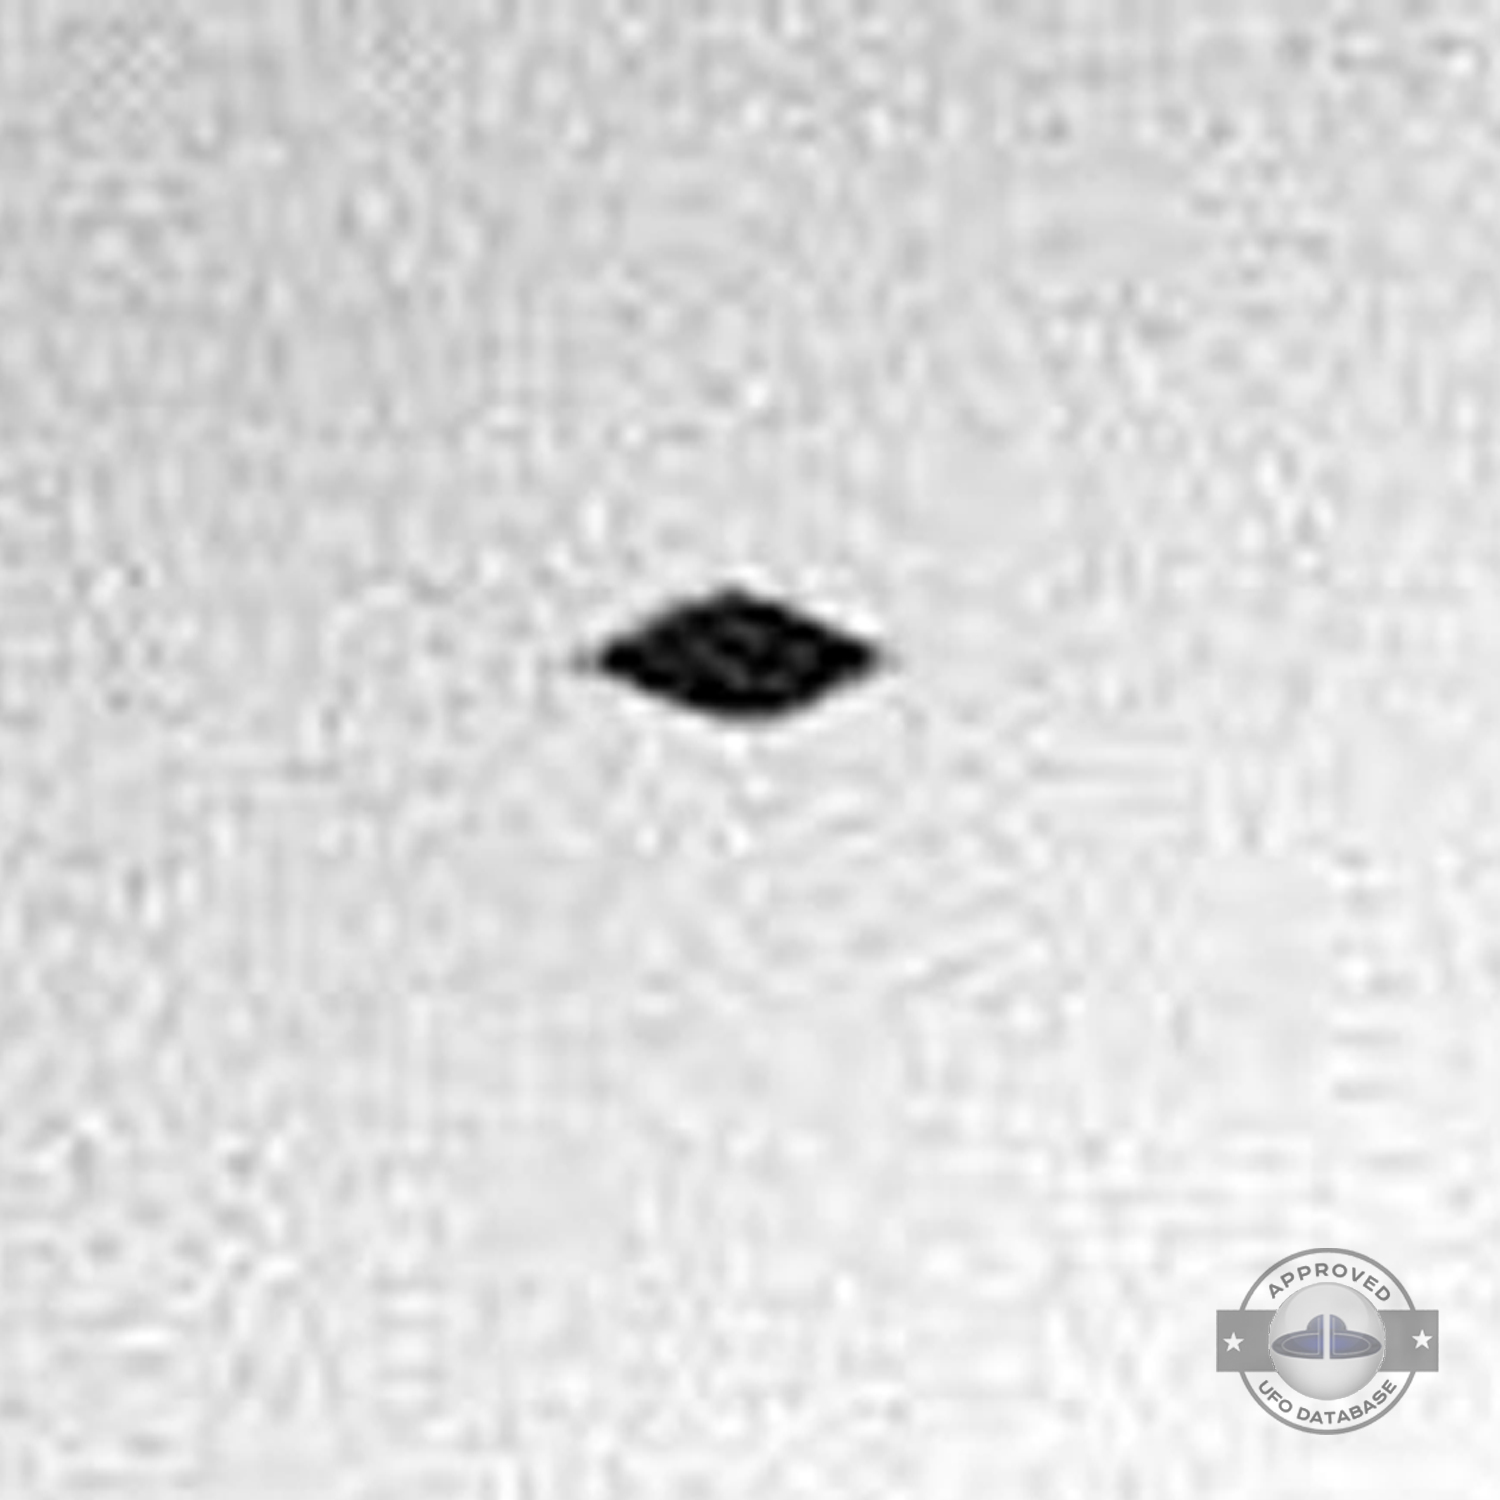 Sighting of UFO by two teenagers in Russia - Volga river Tver | 1991 UFO Picture #215-4